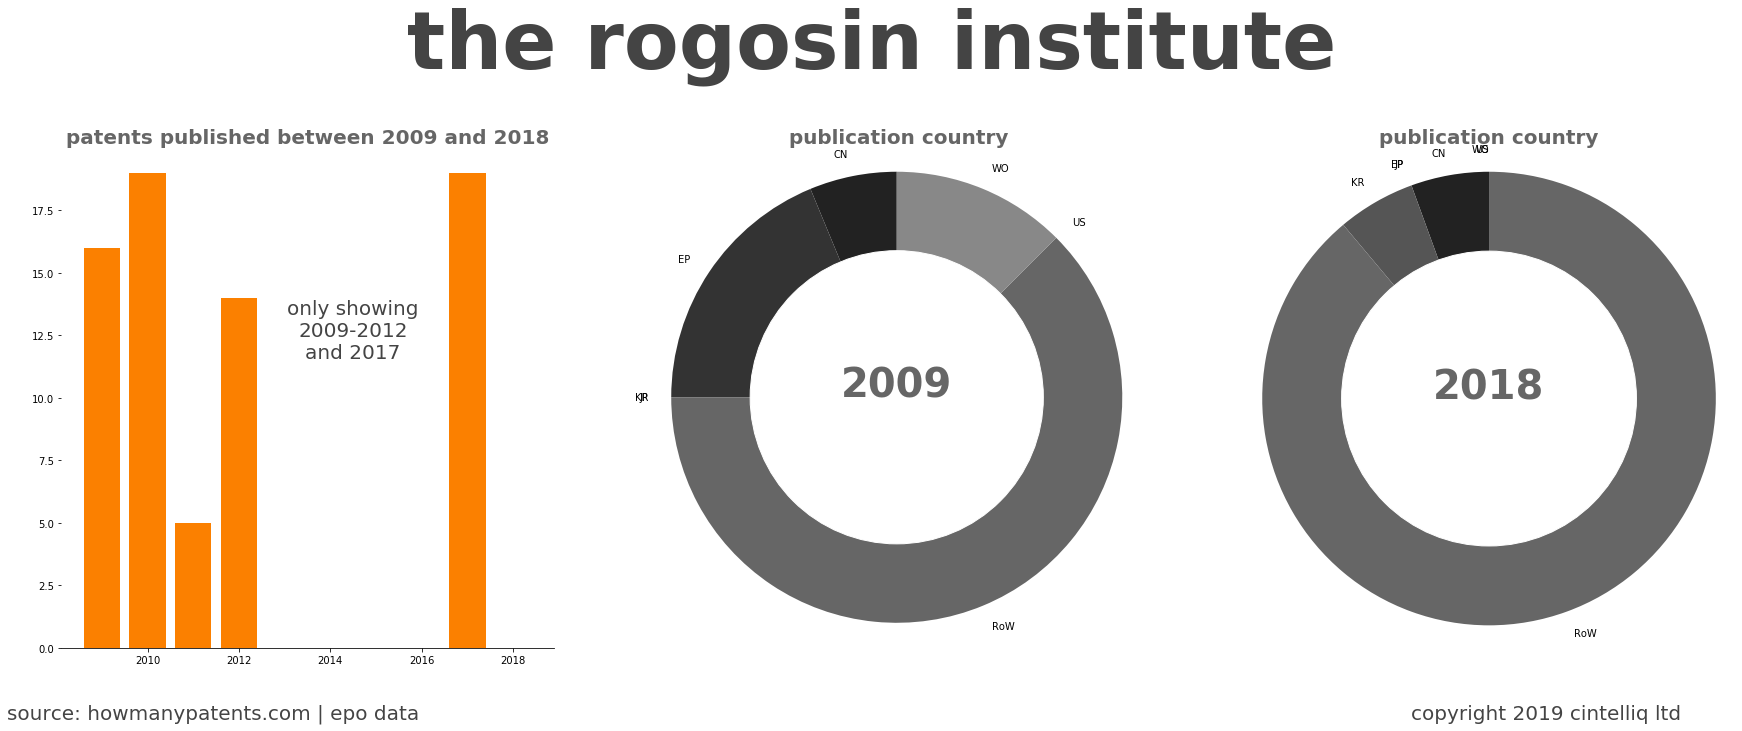 summary of patents for The Rogosin Institute